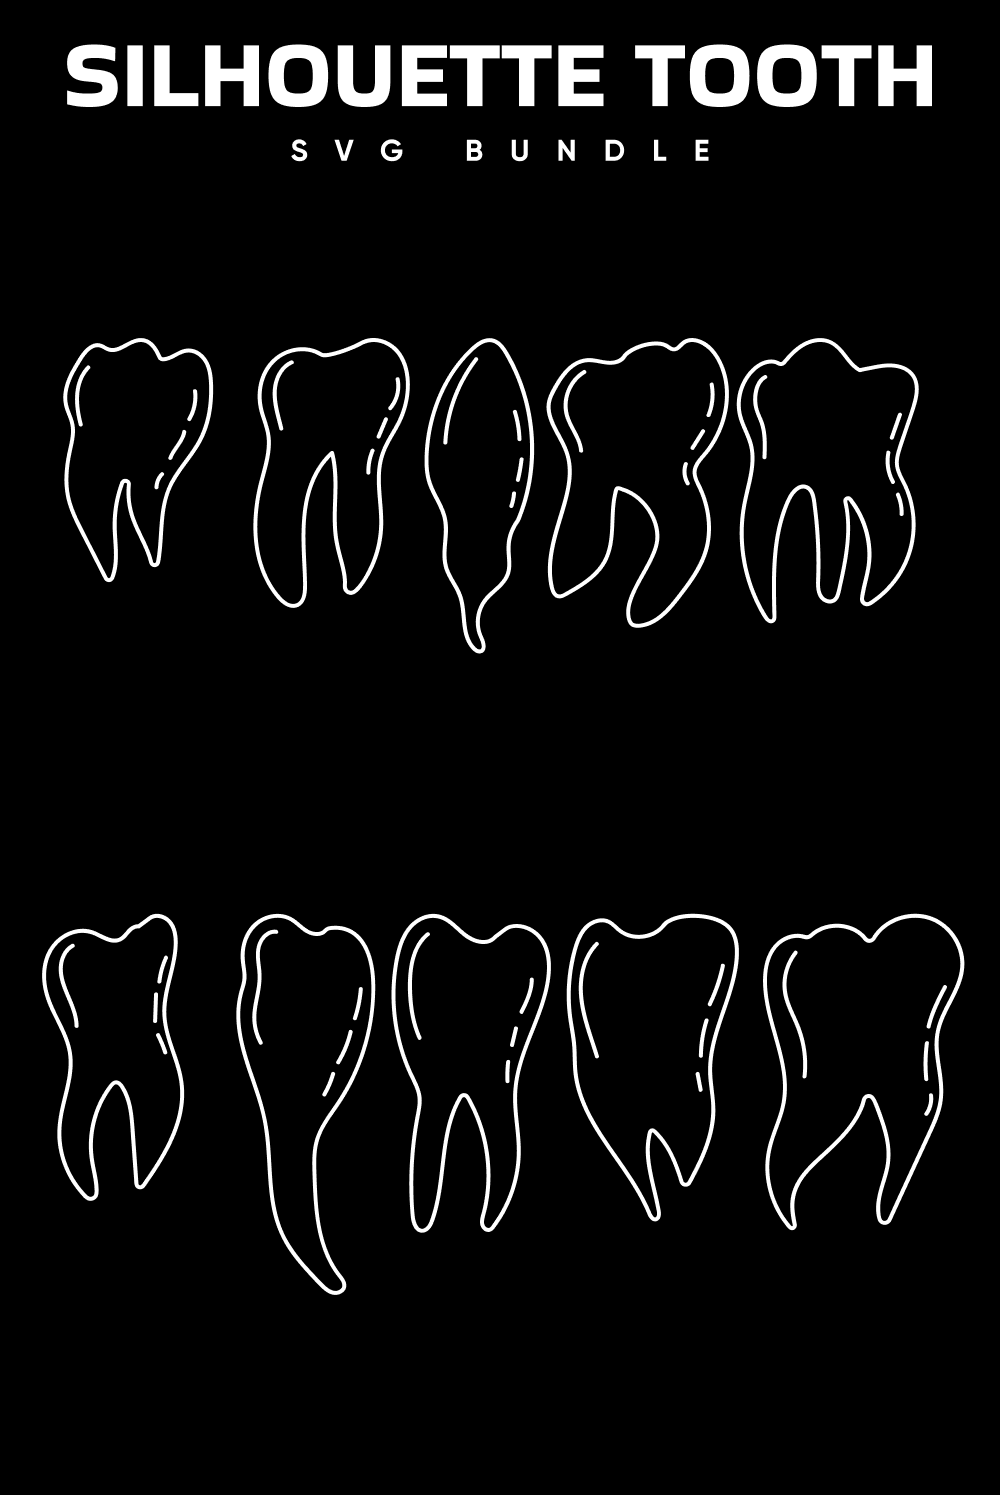 Pinterest picture with ten white teeth silhouettes with product title on black background.